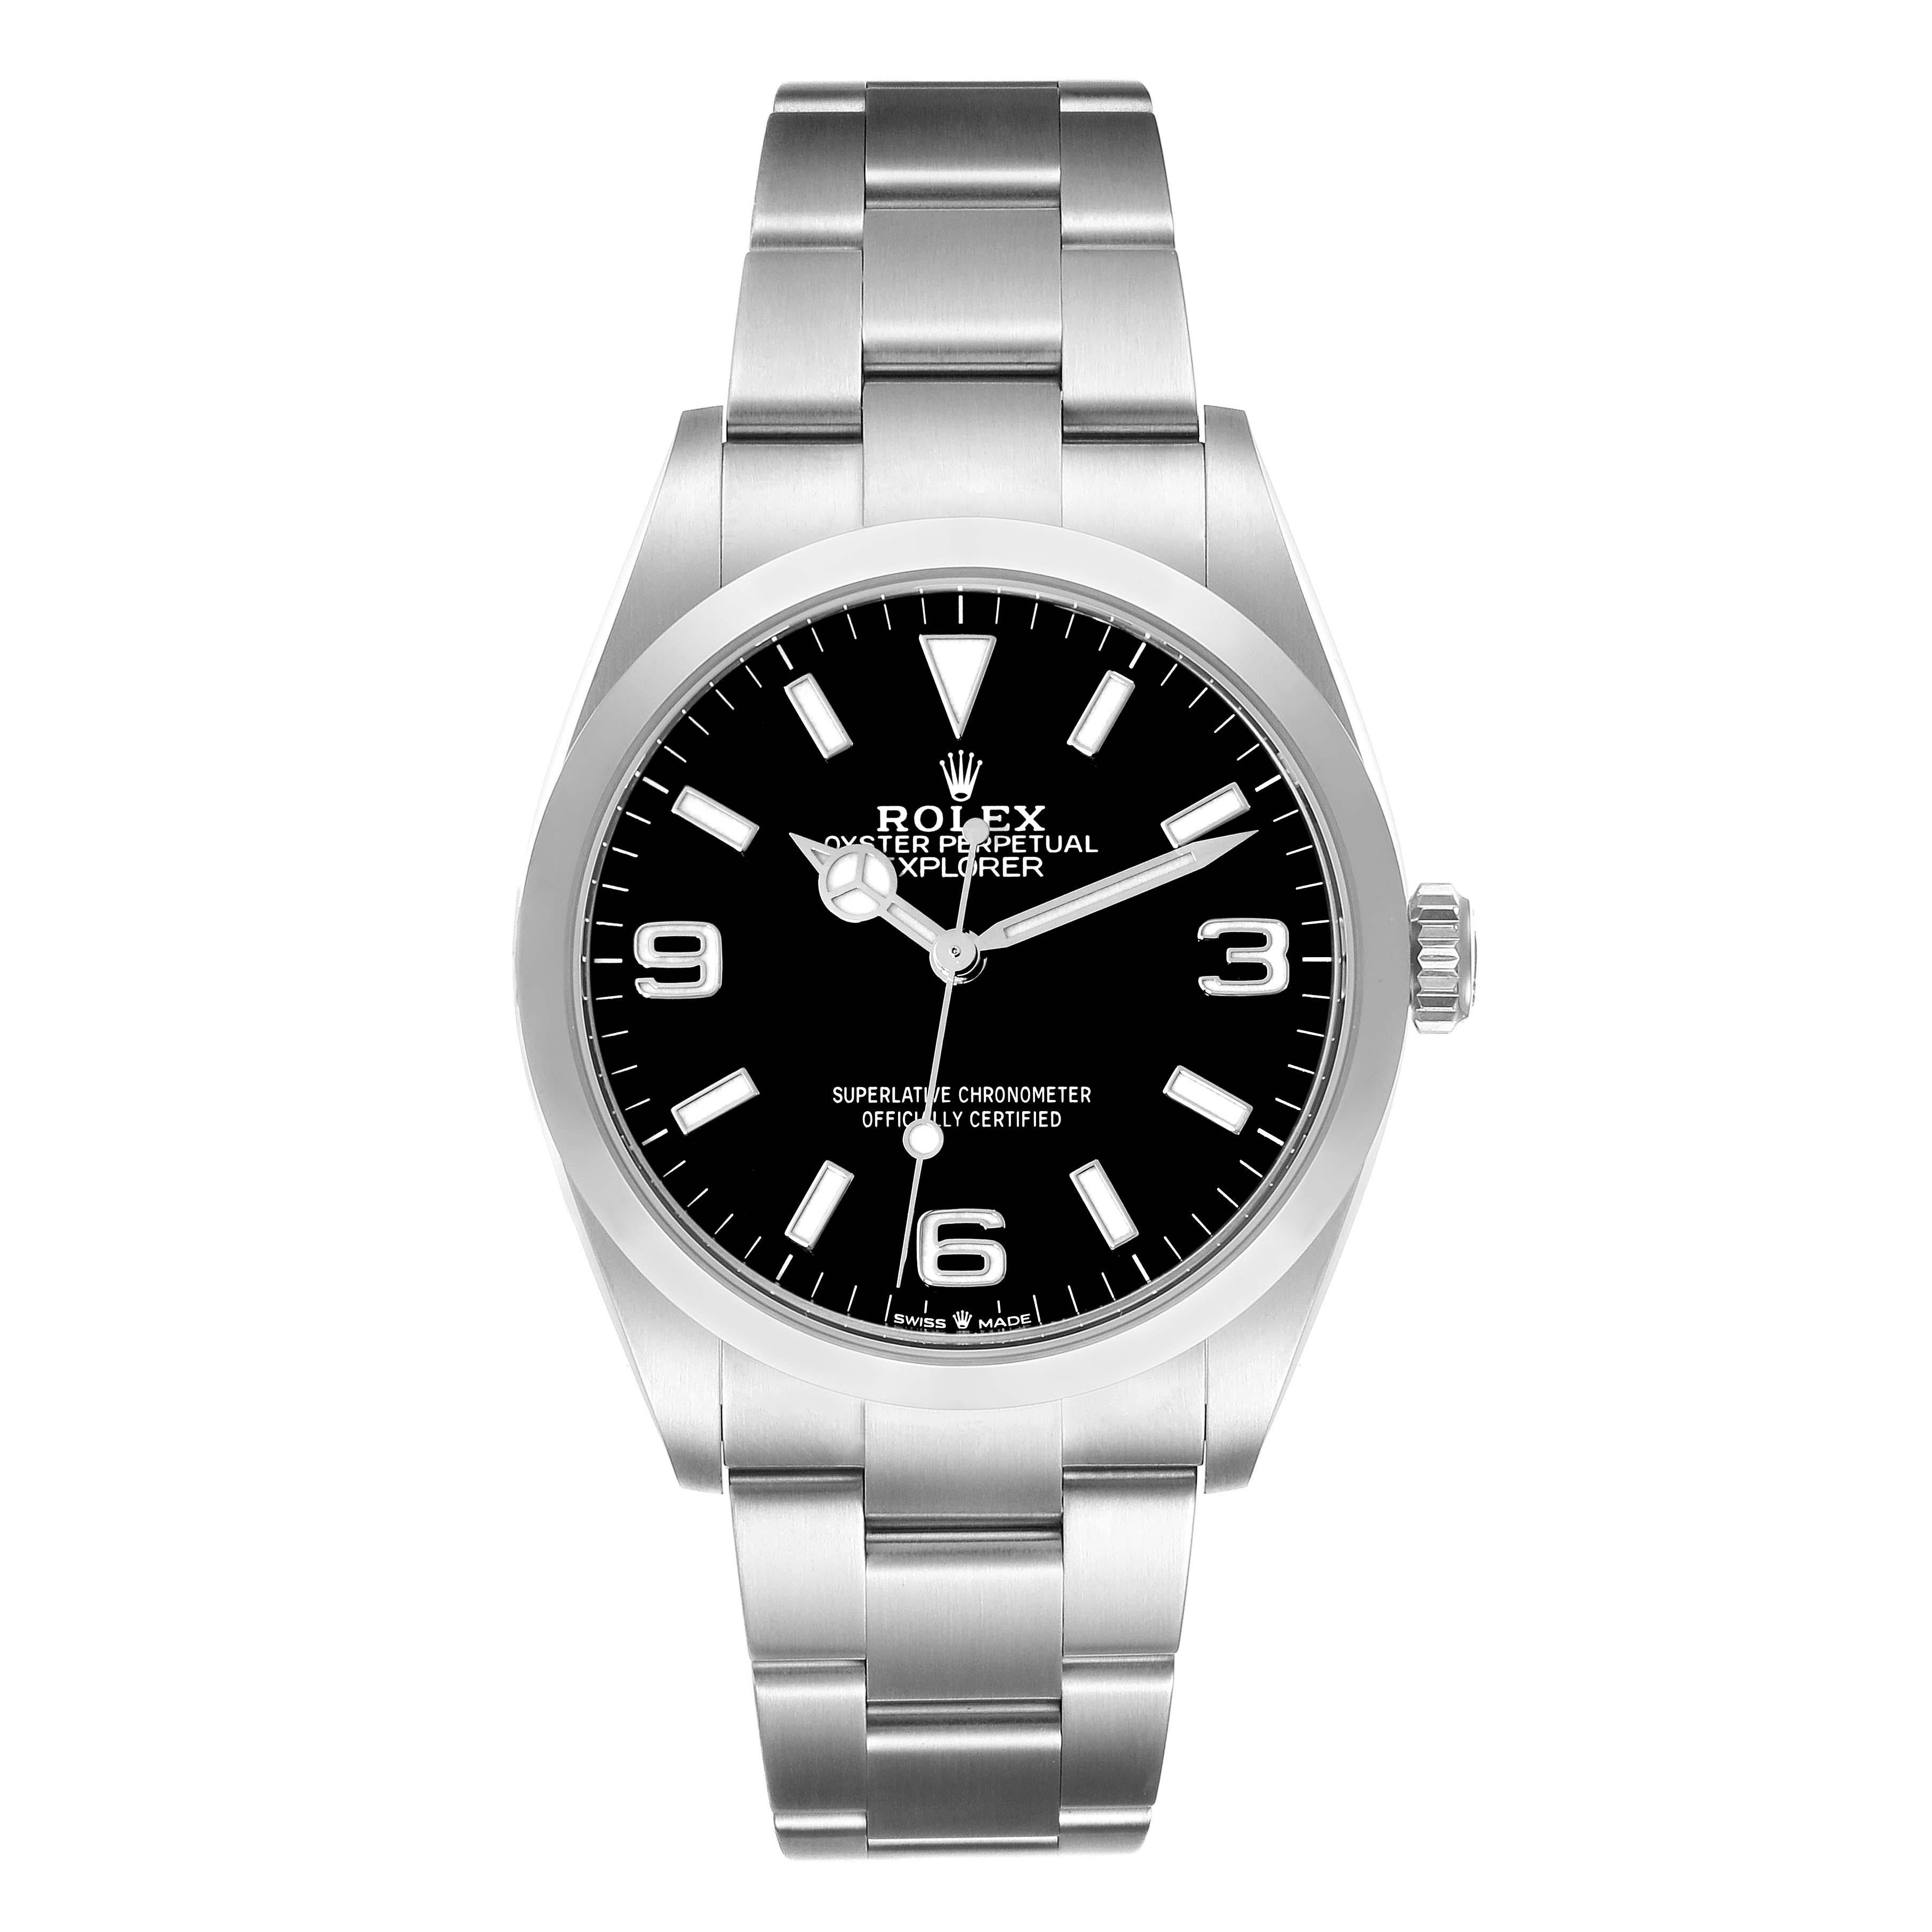 Rolex Explorer I 36mm Black Dial Steel Mens Watch 124270 Box Card. Officially certified chronometer automatic self-winding movement. Stainless steel case 36.0 mm in diameter. Rolex logo on the crown. Stainless steel smooth bezel. Scratch resistant